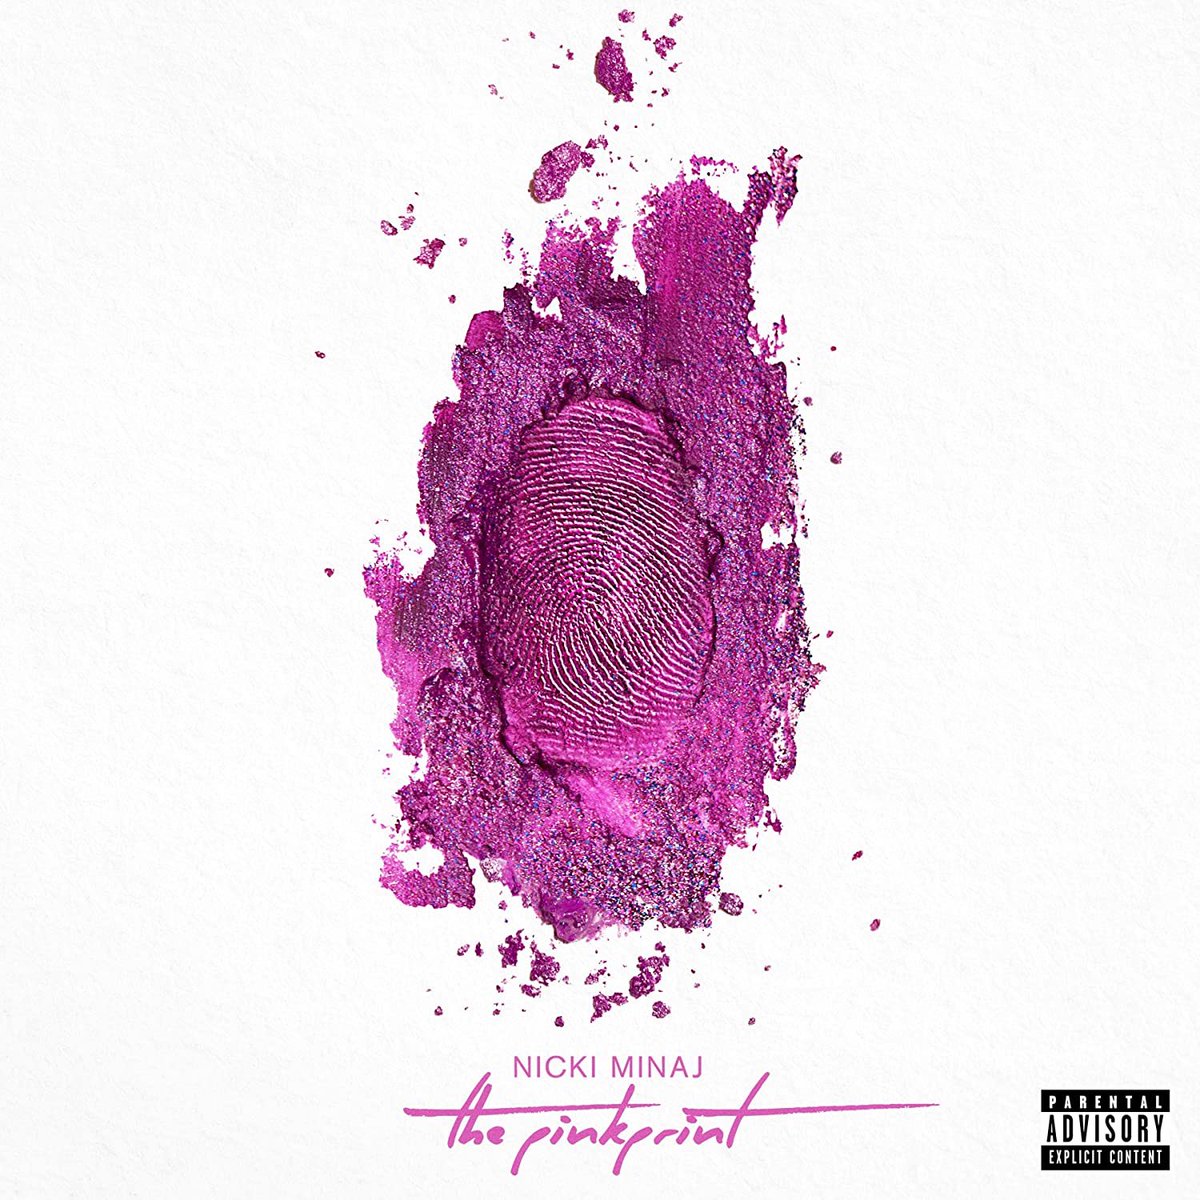 2014: In December of this year Nicki Minaj drops her 3rd album The Pinkprint containing the hits “Only” and “Truffle Butter”